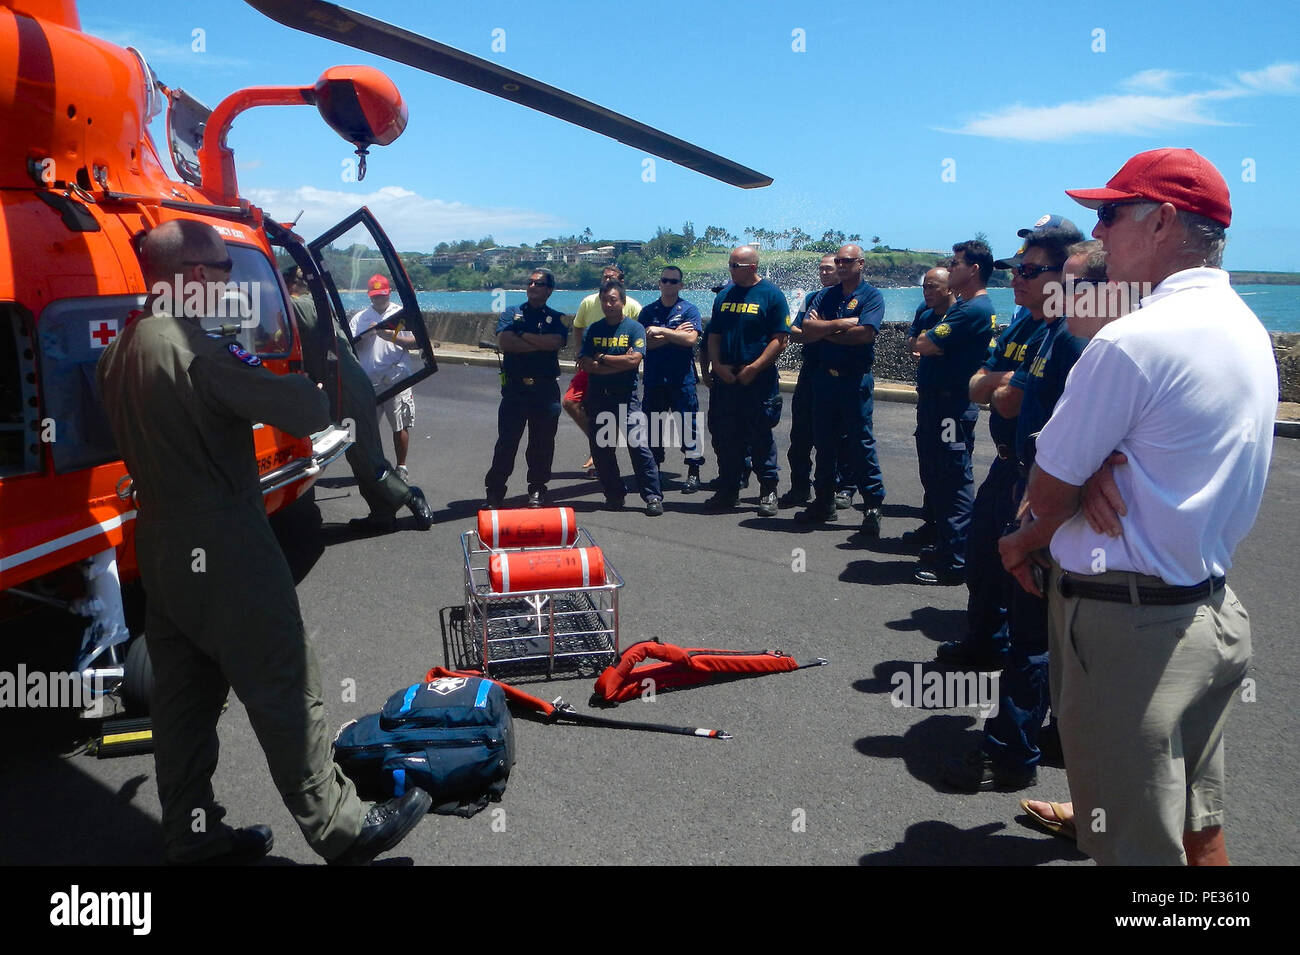 Lt. Samuel Pemberton, an MH-65 Dolphin helicopter pilot from Coast Guard Air Station Barbers Point, provides training to search and rescue exercise participants on the equipment and procedures used by the Dolphin crew in SAR cases during a search and rescue exercise in Kauai, Hawaii, Sept. 3, 2015. The exercise brought together the Coast Guard, Kauai Fire Department and Ocean Safety. (U.S. Coast Guard photo by Coast Guard Sector Honolulu/Released) Stock Photo